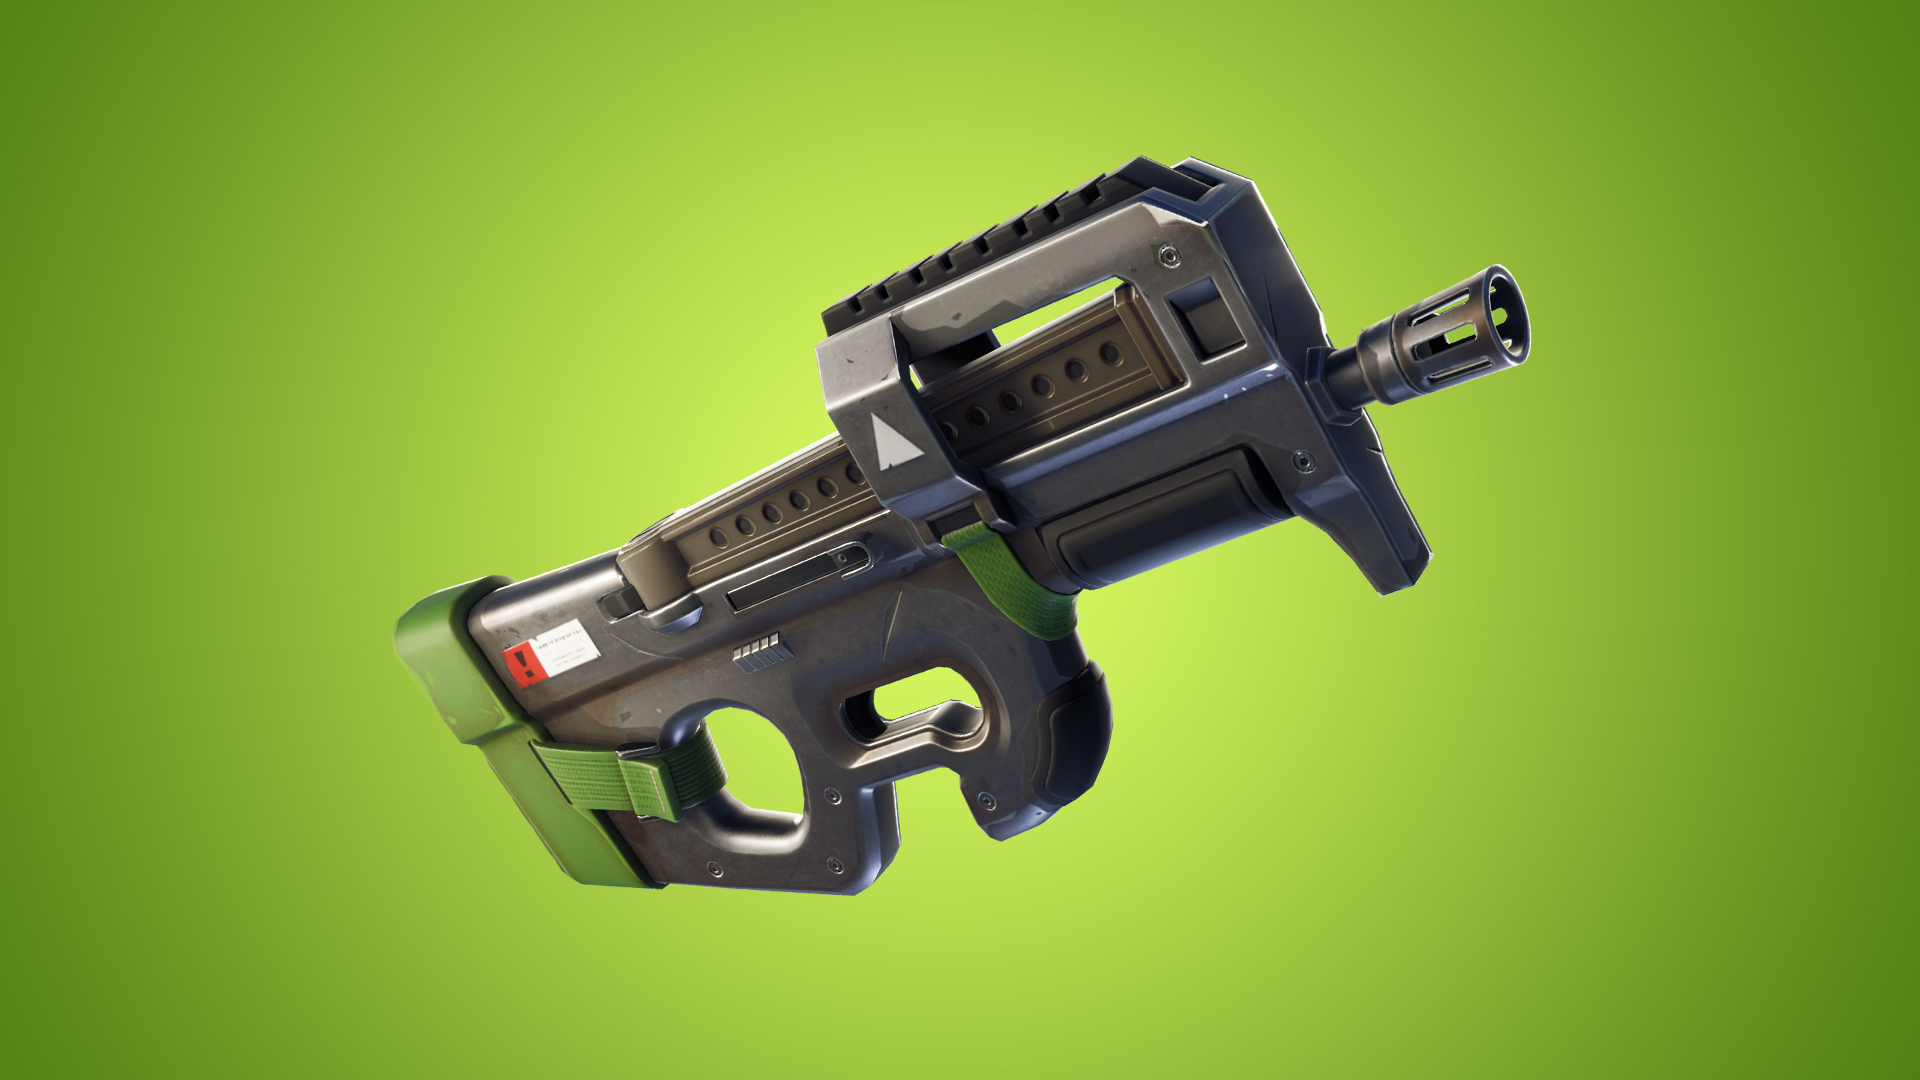 fortnite p90 epic games nerfs compact smg after players complaints inverse - fama fortnite